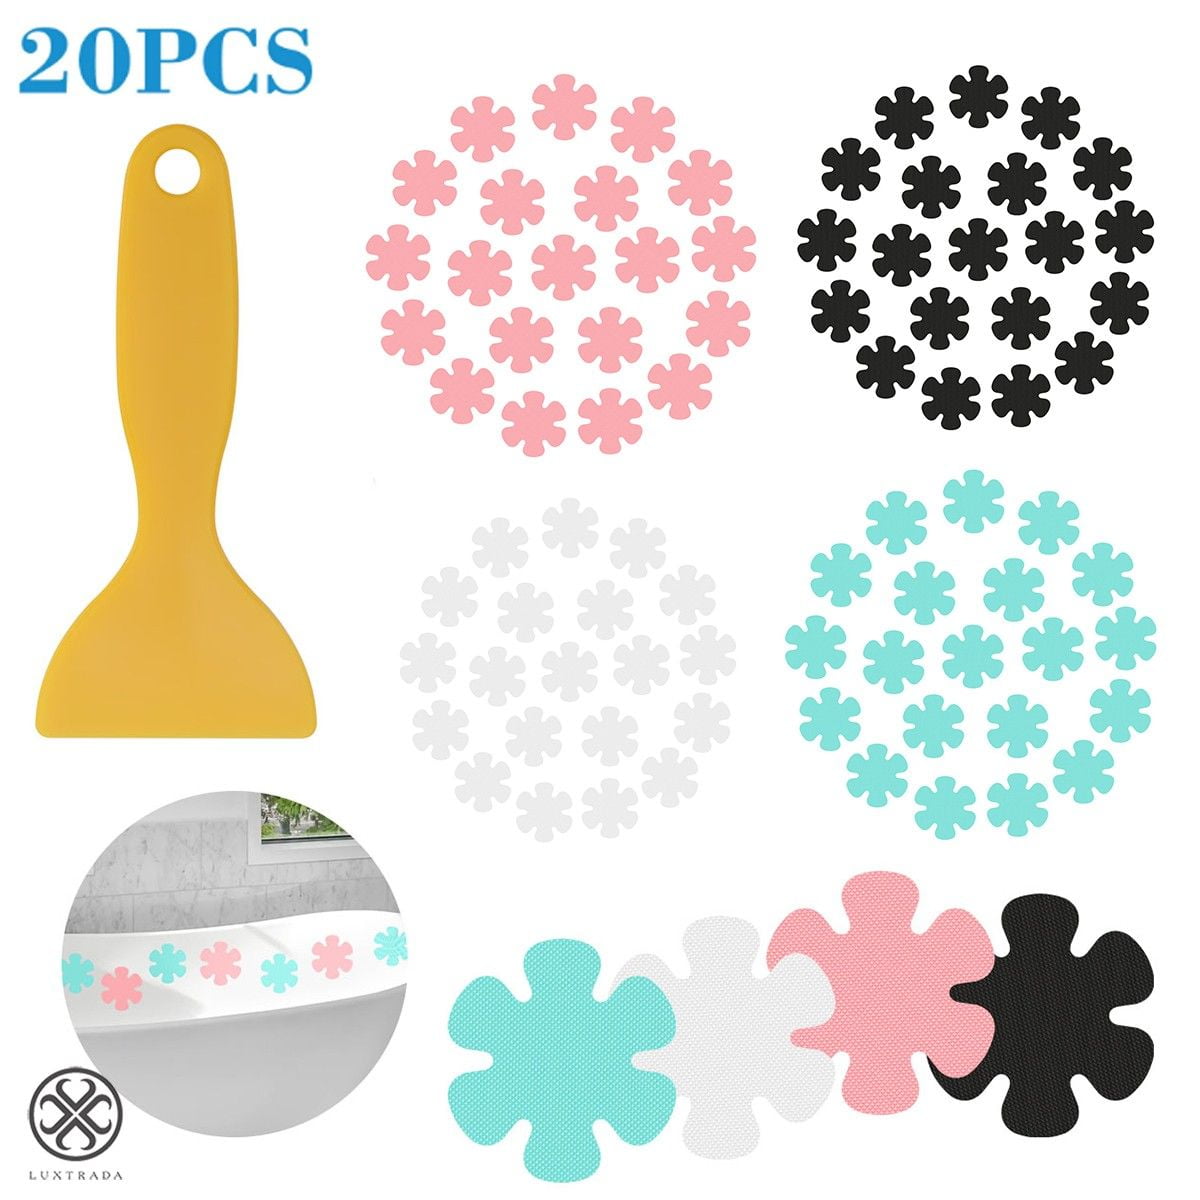 20Pcs Flower Safety Anti-slip Treads Adhesive Applique Tub Stickers Stair Decals 